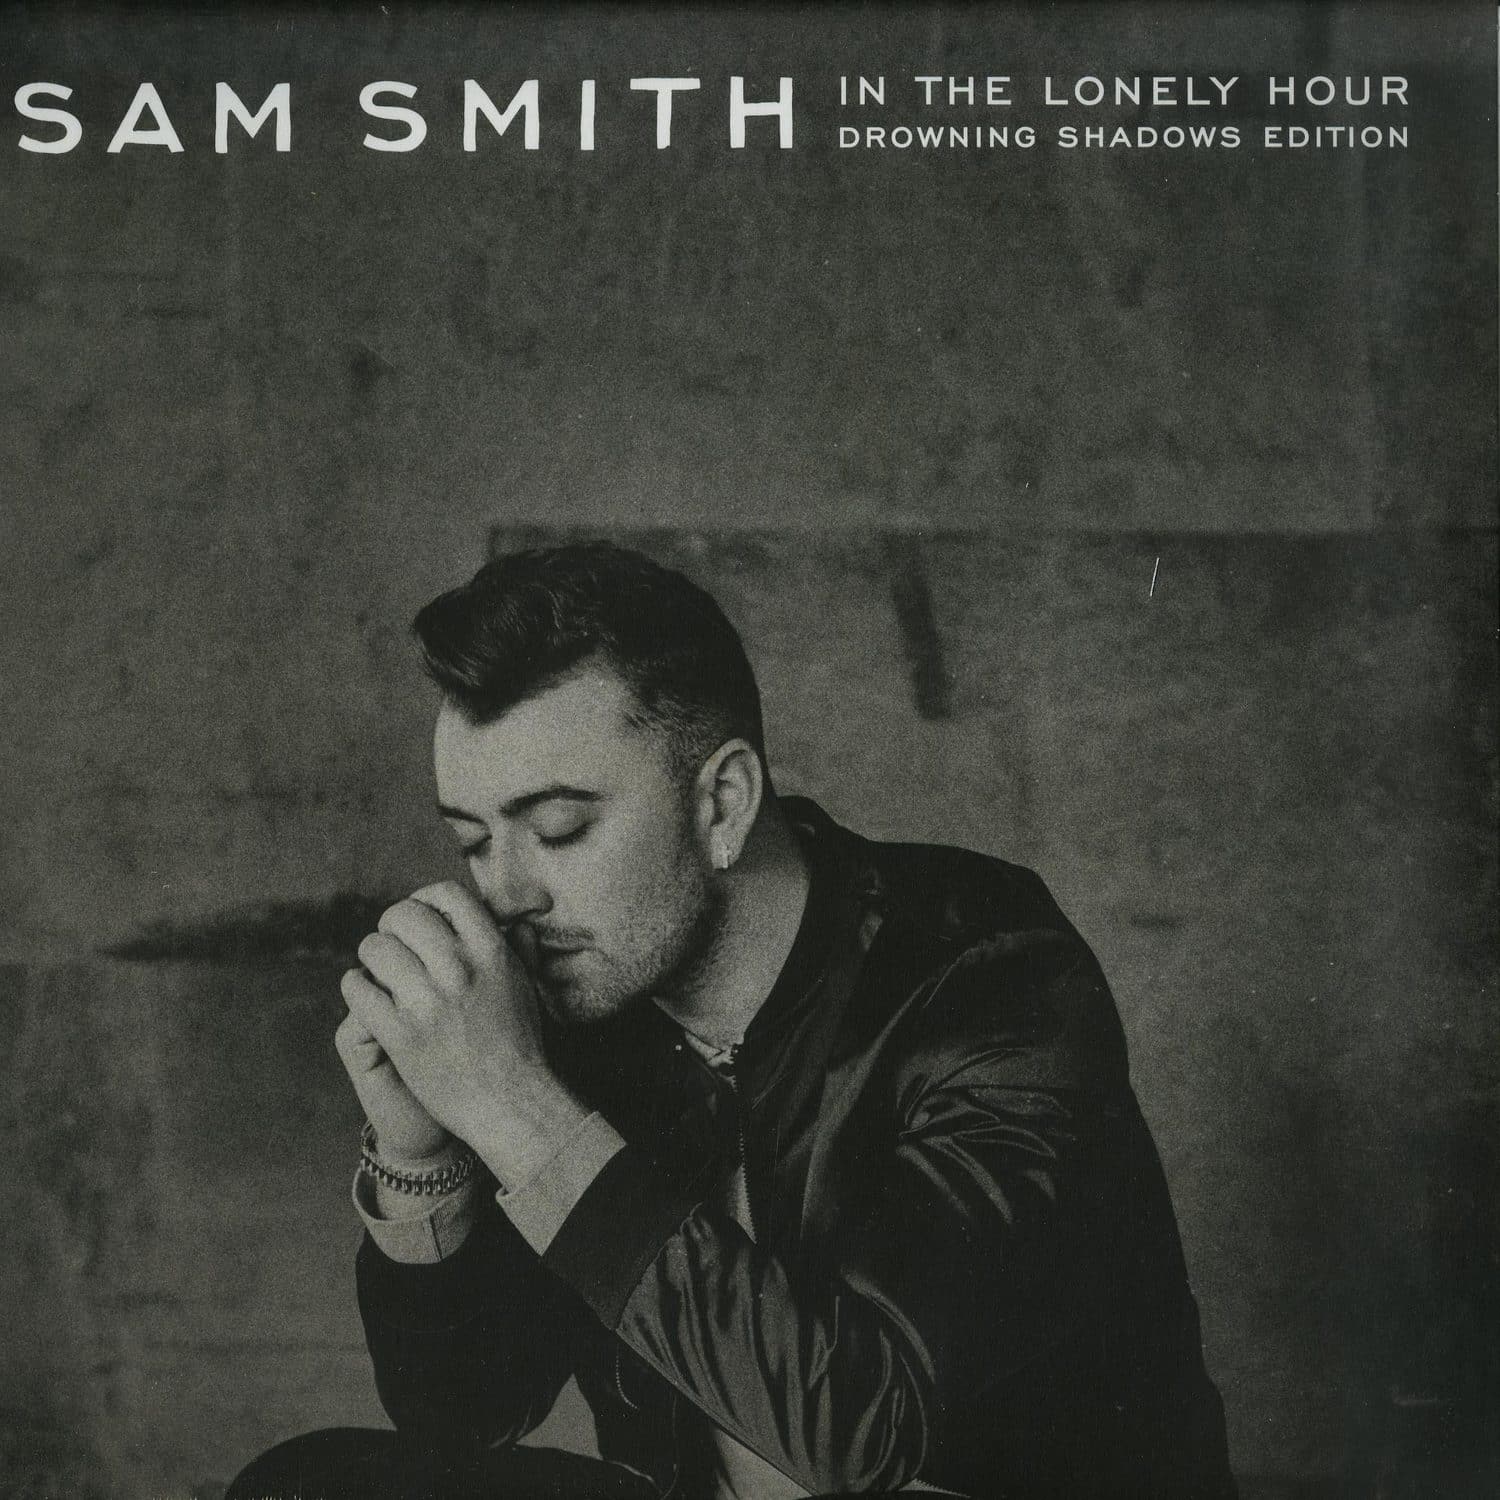 sam smith in the lonely hour drowning shadows edition